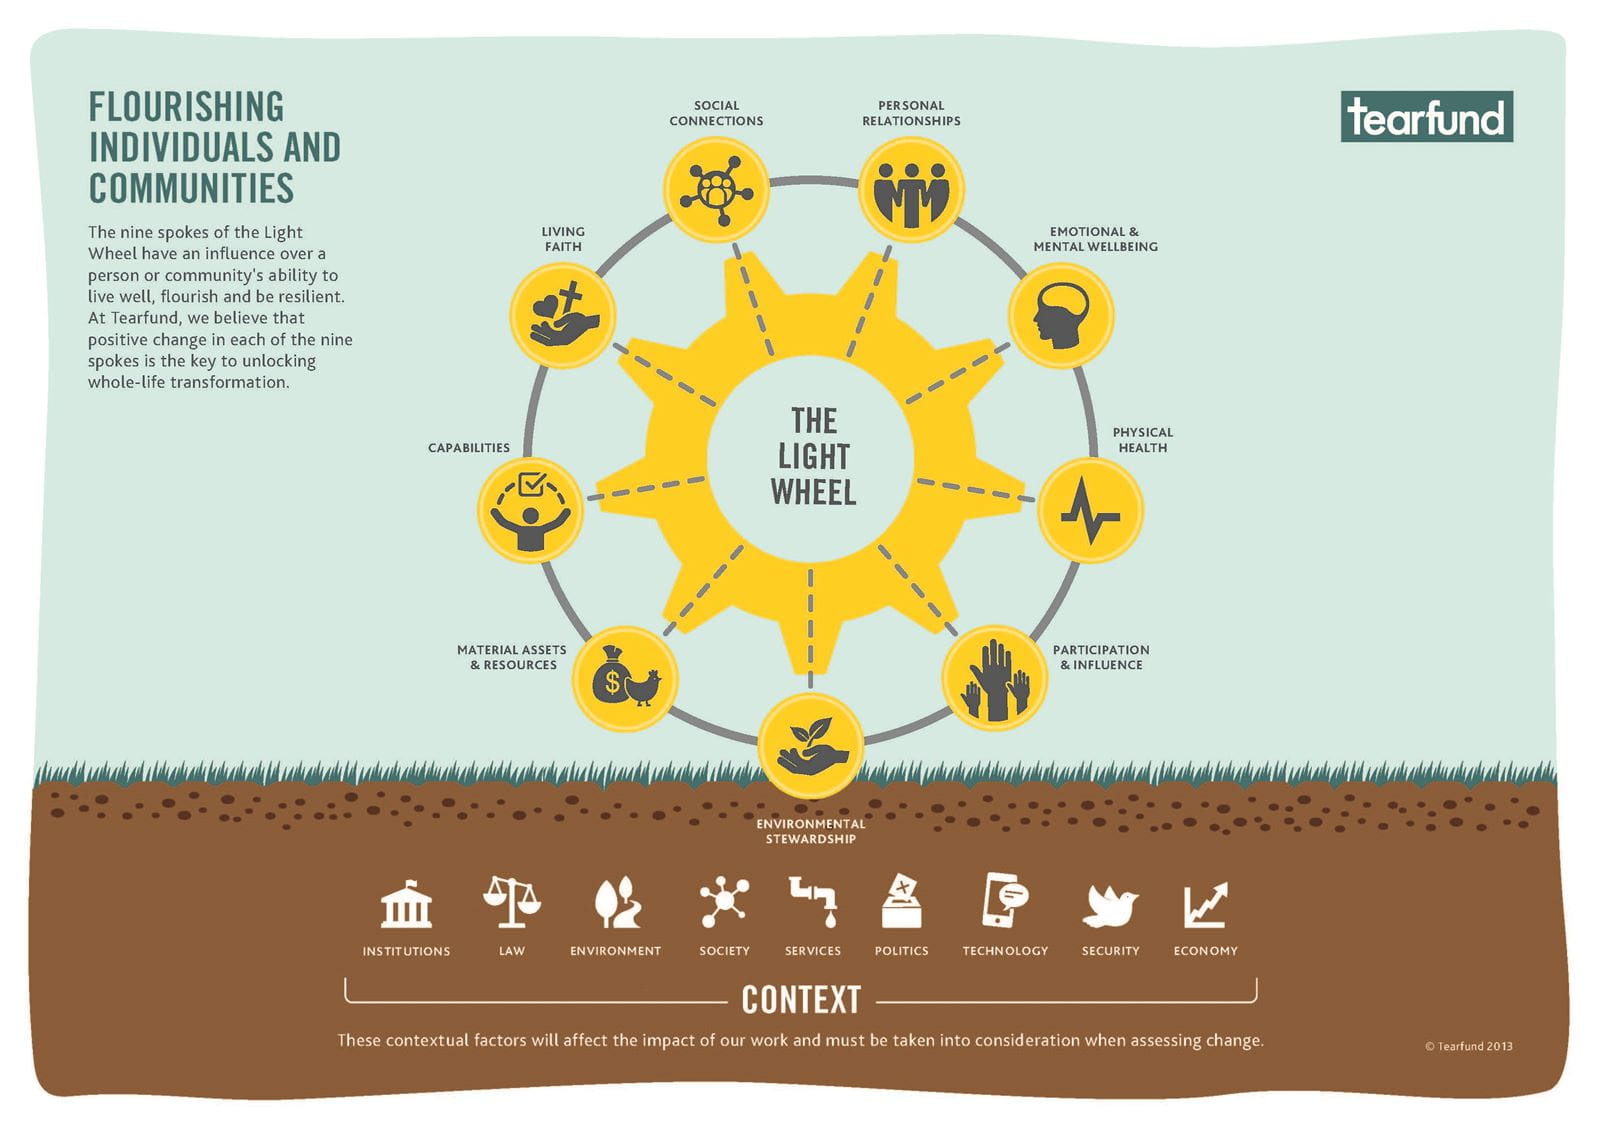 A diagram of a yellow wheel with nine spokes, each of which represents an 'aspect of wellbeing' that contributes to human flourishing and the transformation of people's lives and communities